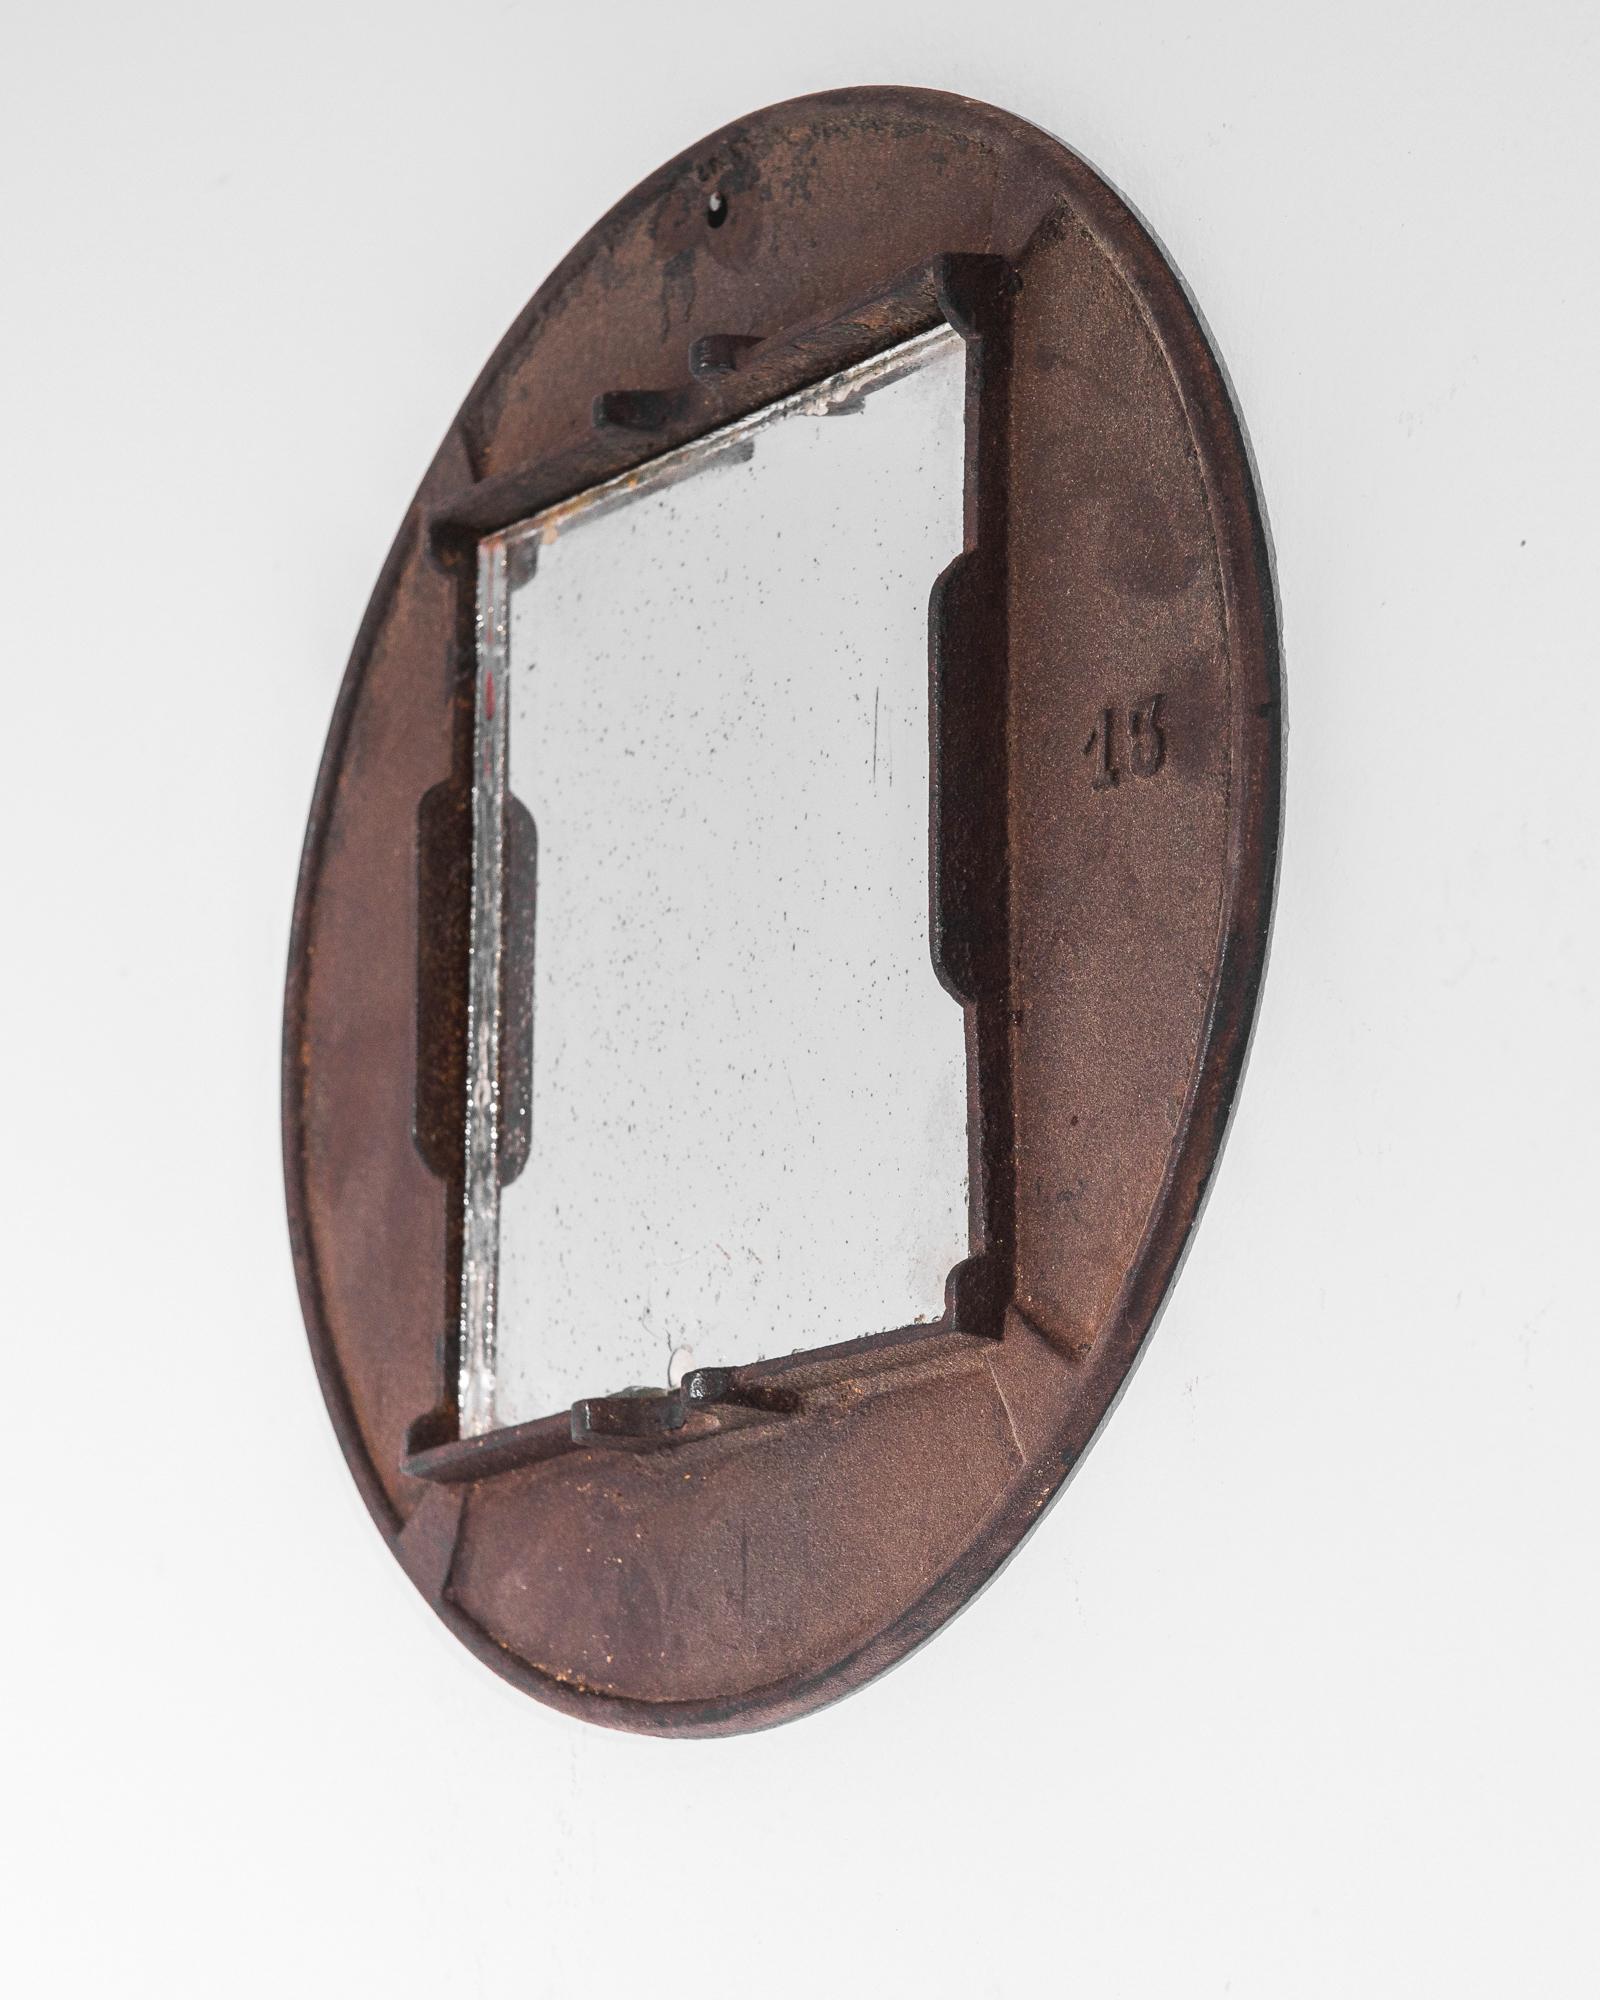 An iron mirror from 1920s Belgium. An interplay of shapes and textures creates a weathered industrial aesthetic: a rectangular mirror is set inside a circular iron frame, oxidized to a dusky burgundy. The soft patina of the metal and the chipped